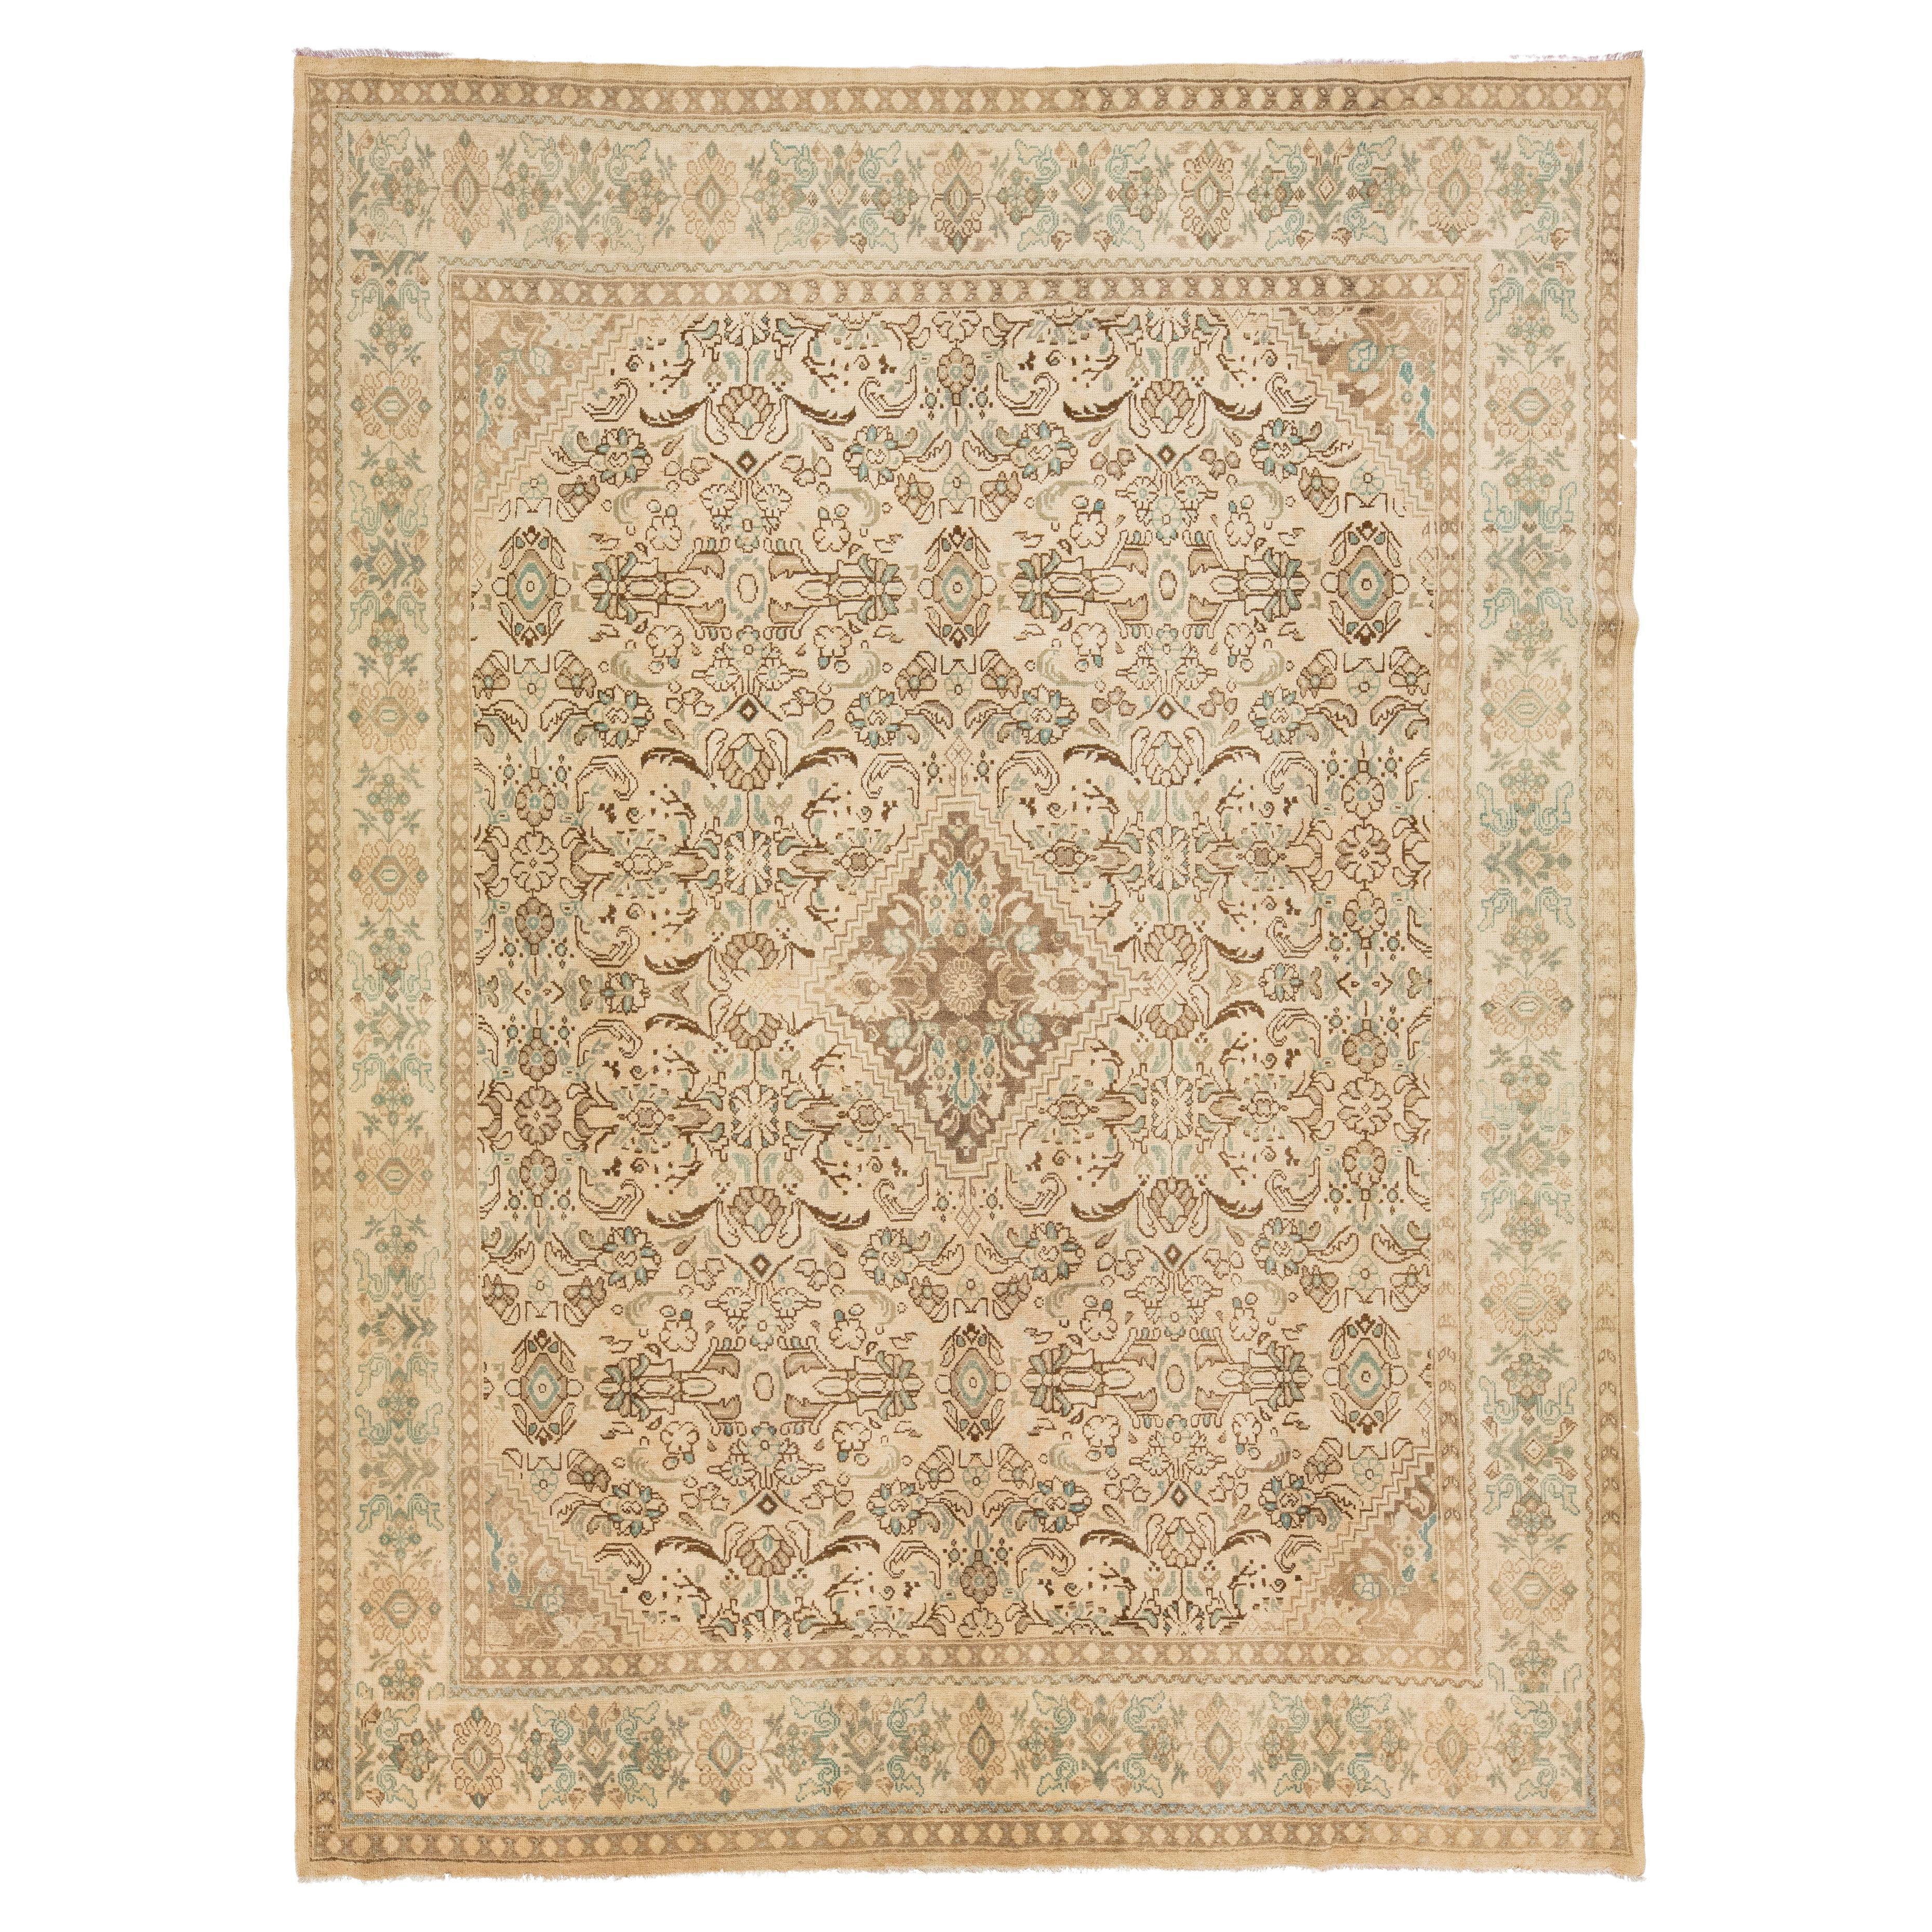 Beige Antique Mahal Wool Rug In Room Size with Floral Design For Sale